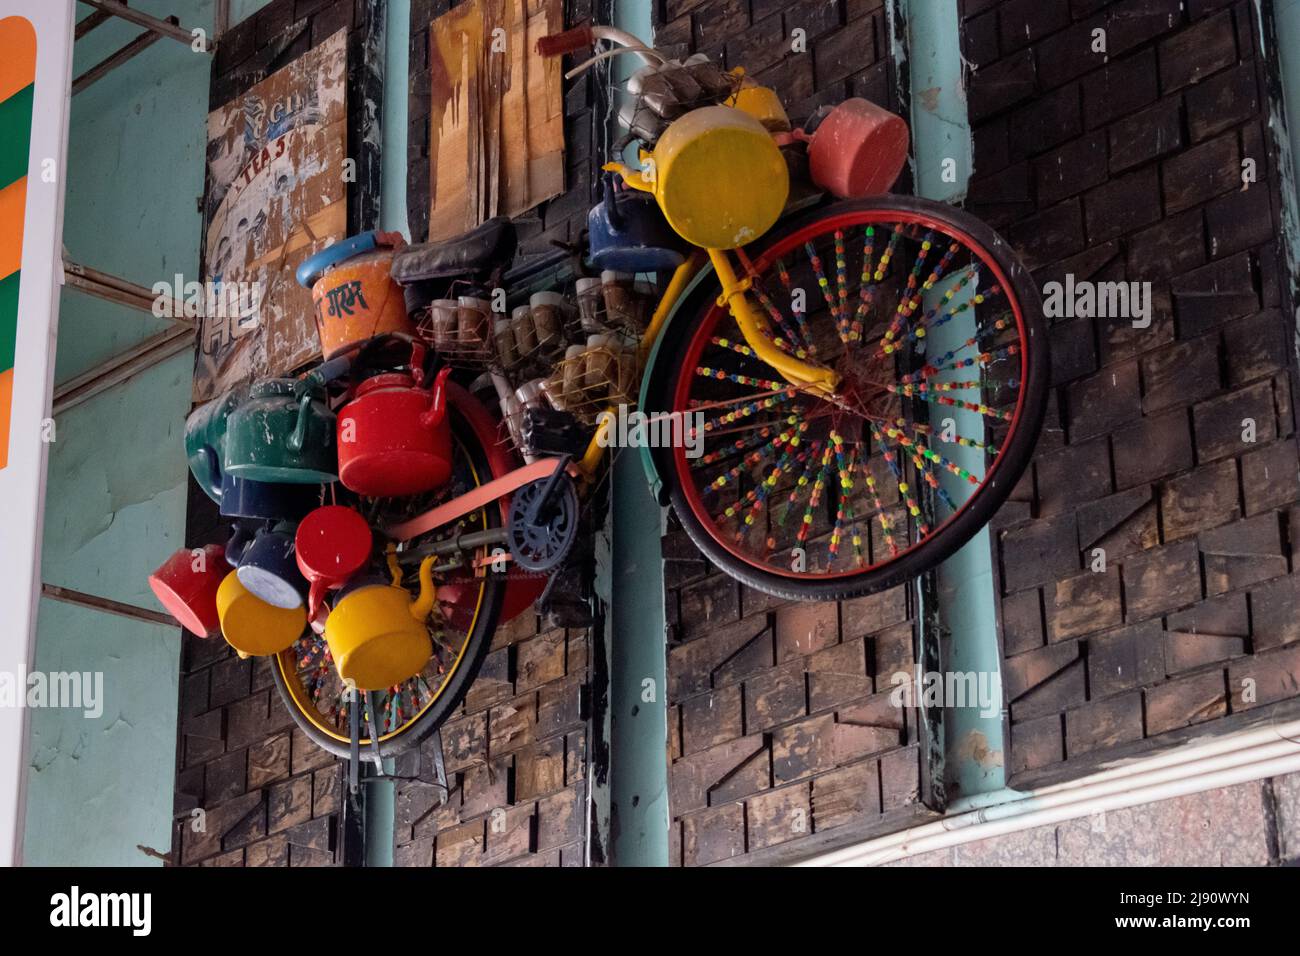 Show piece bicycle is hanged on the wall Stock Photo